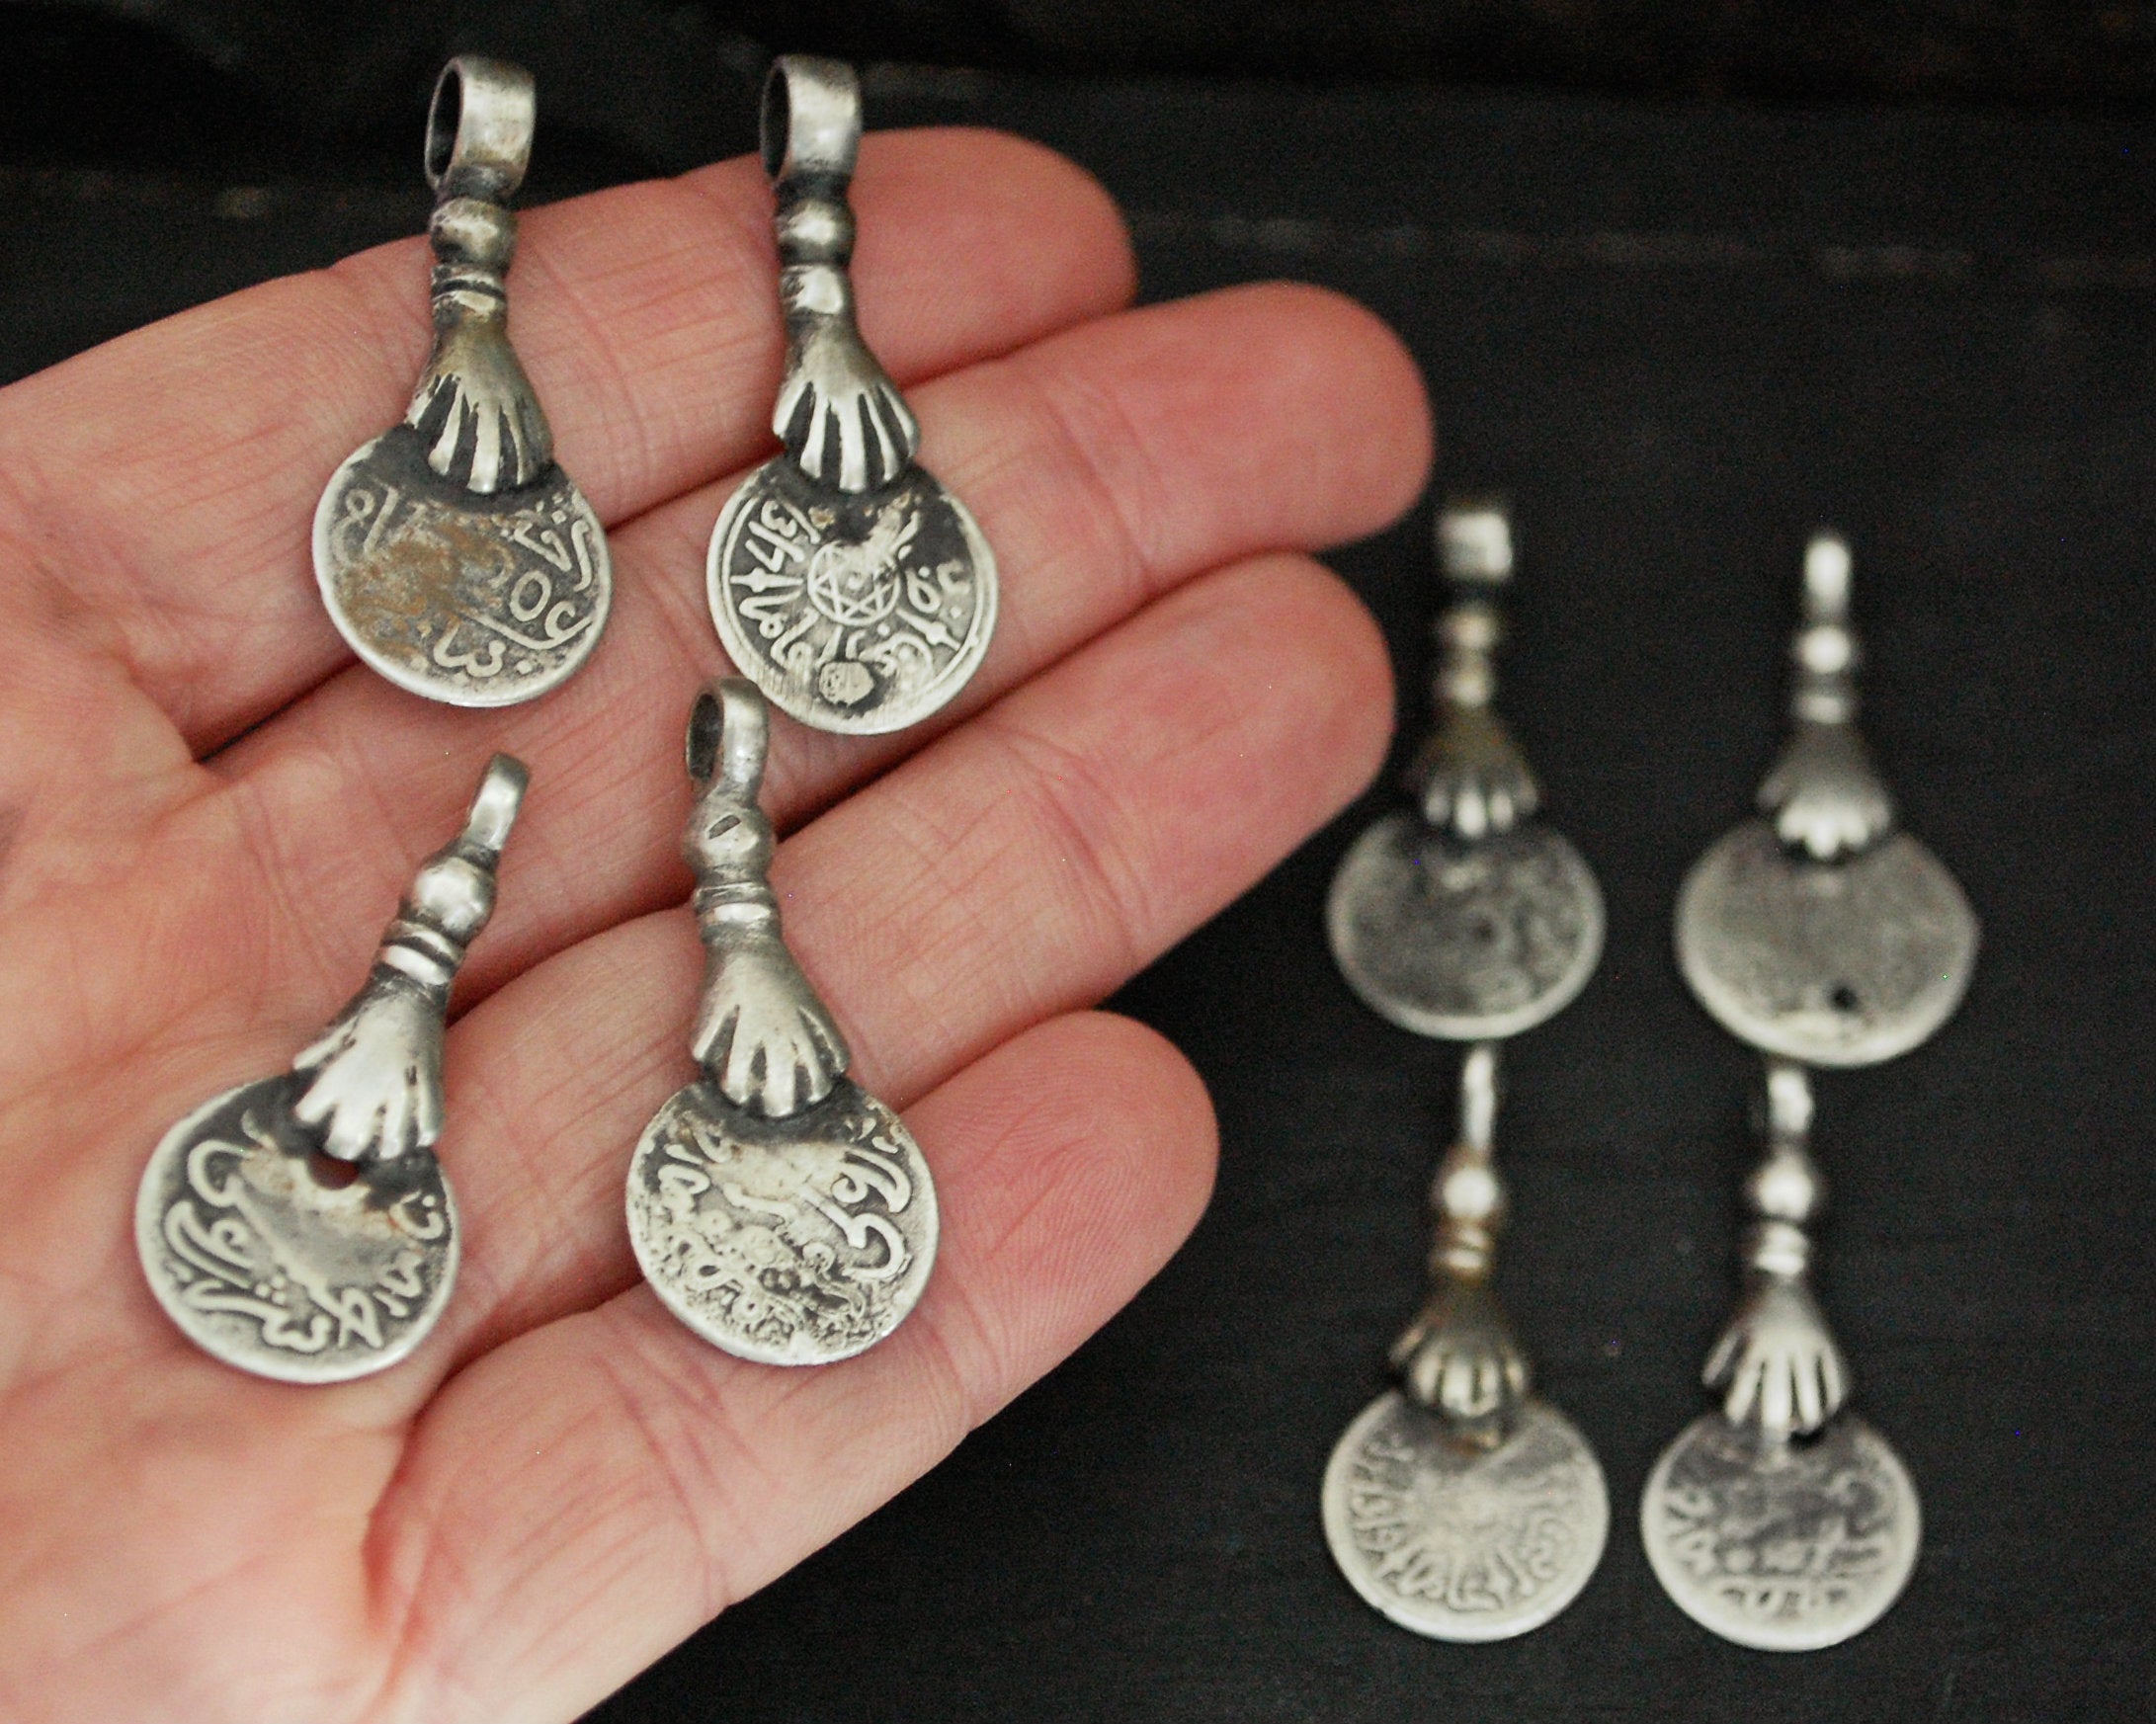 Old Berber Coin Pendants - Set of Four